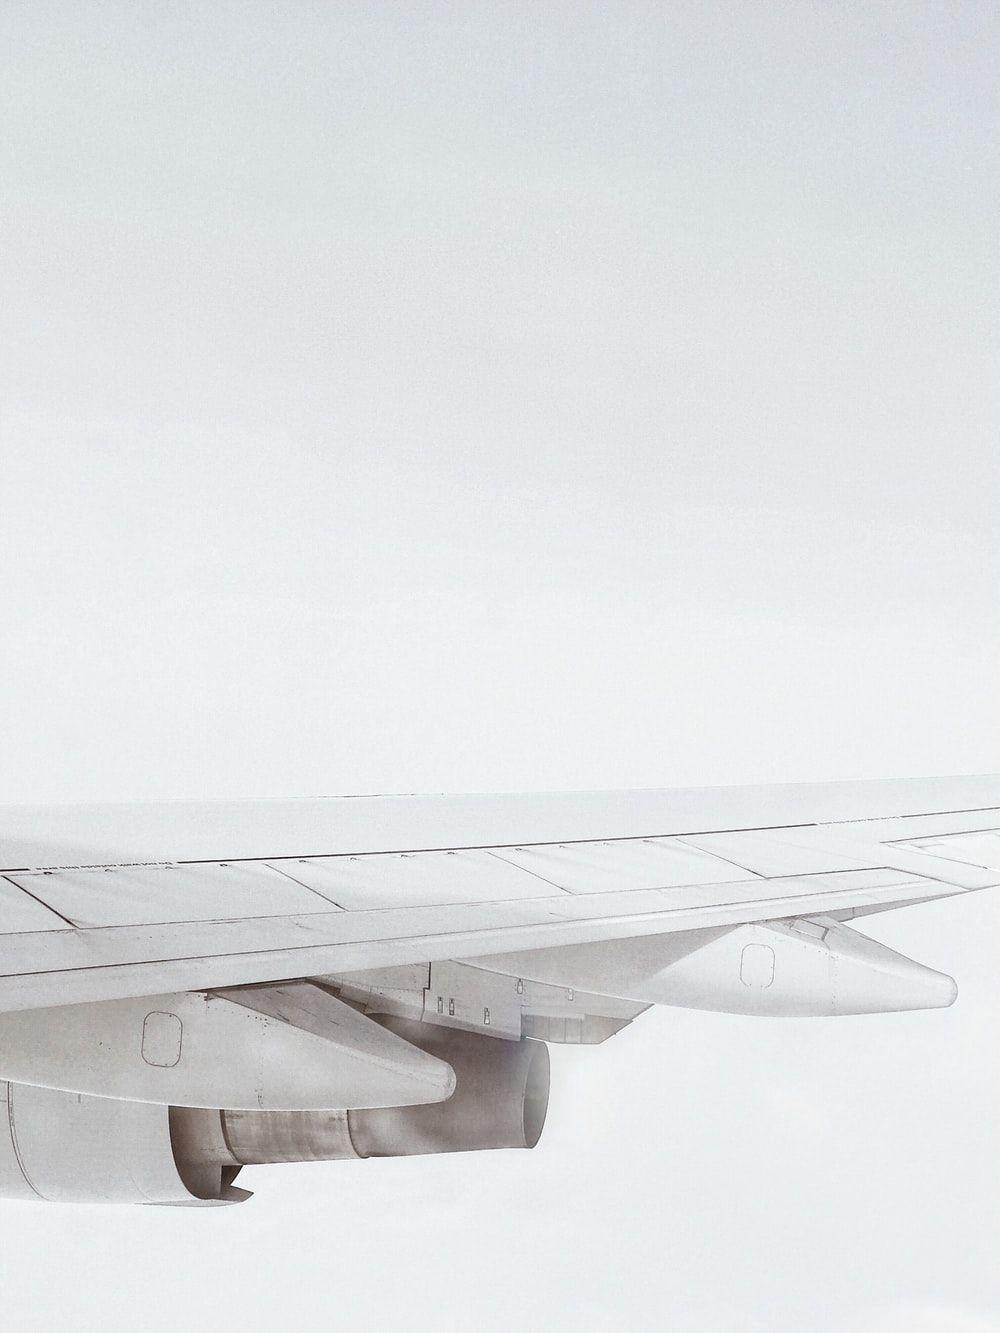 White Plane Wallpapers - Top Free White Plane Backgrounds - WallpaperAccess